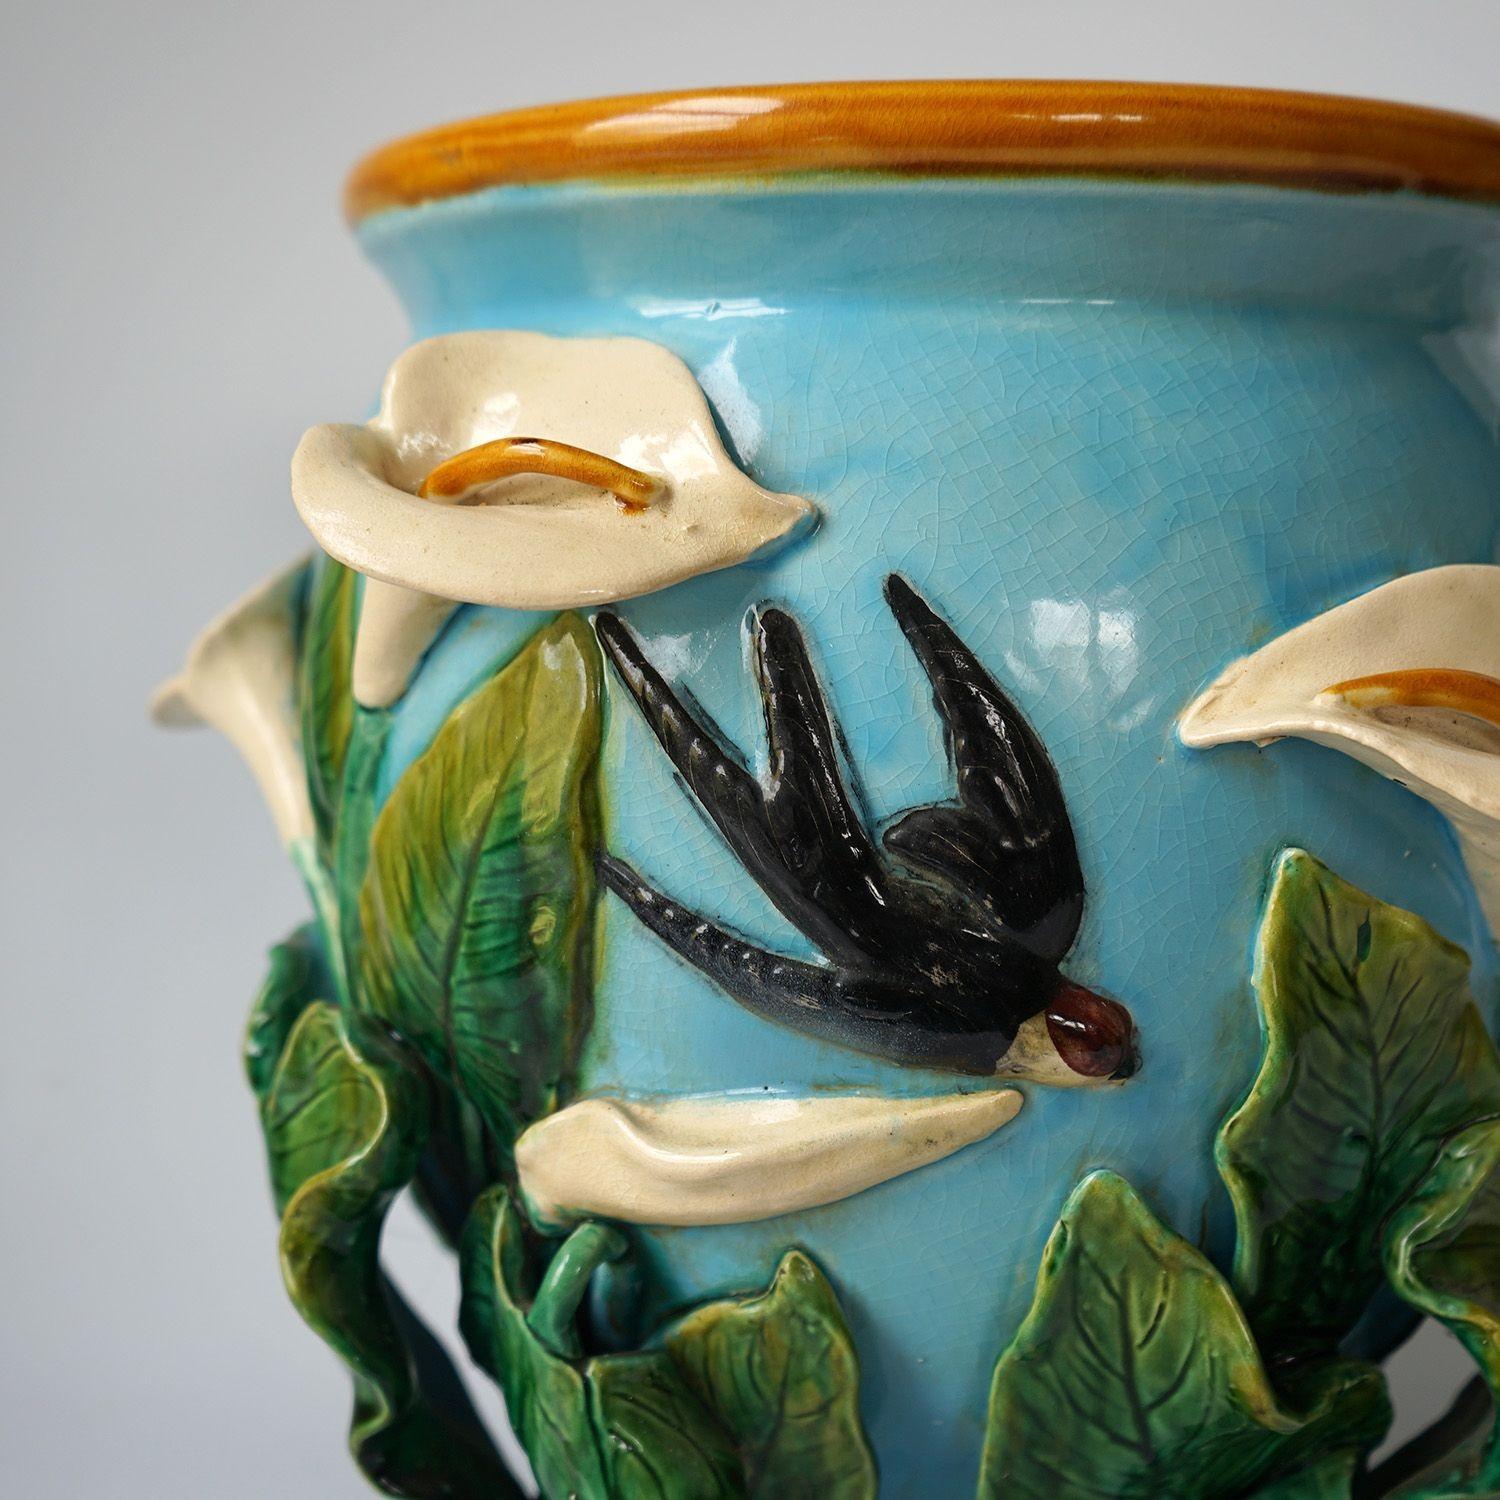 Glazed Antique Majolica 'Swallow and Lily' Jardiniere by George Jones, 19th Century